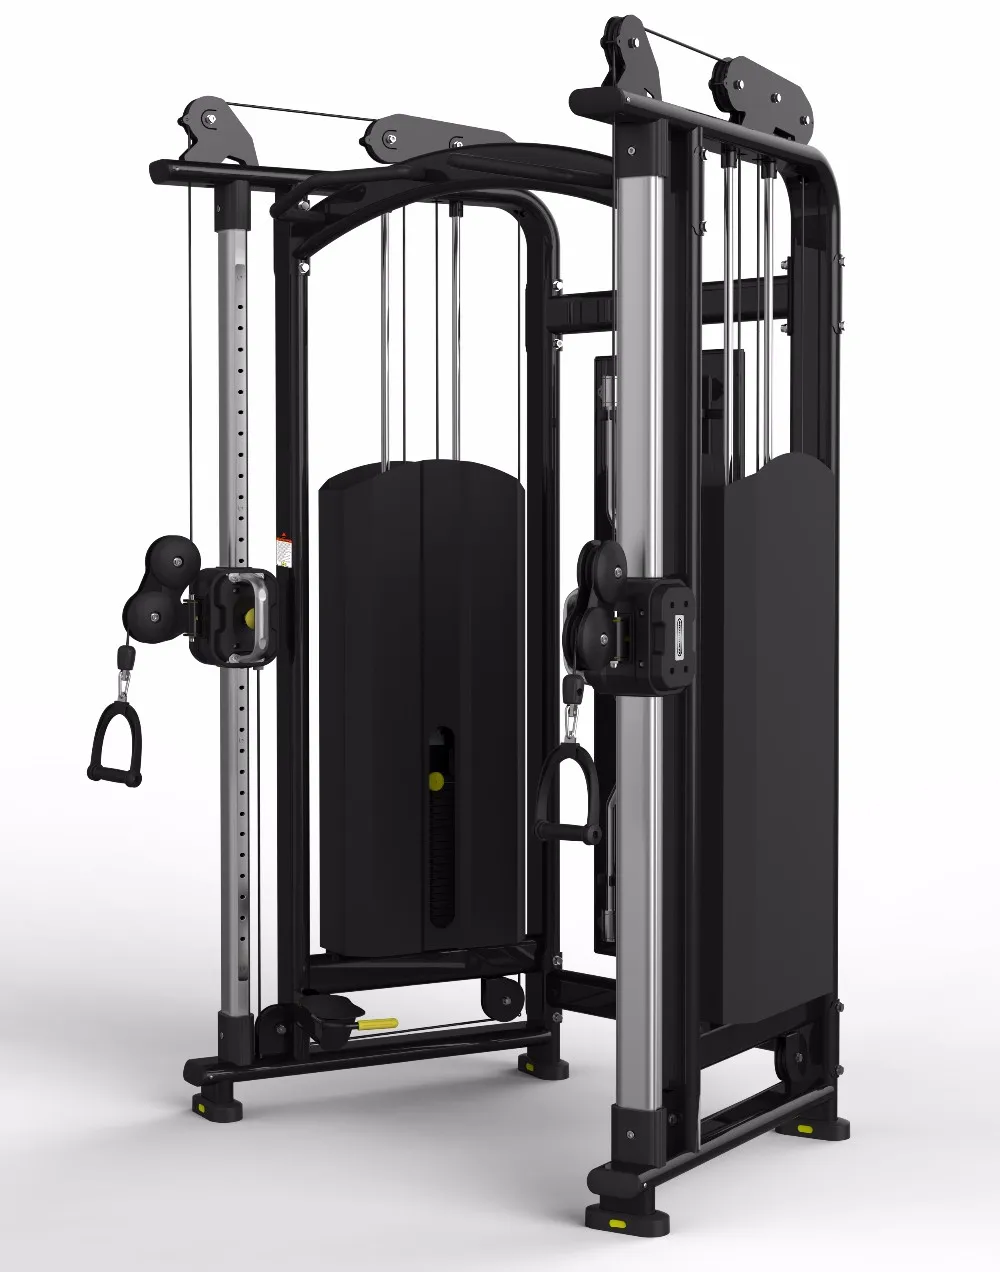 20 Minute Gym equipment companies in korea for at Gym